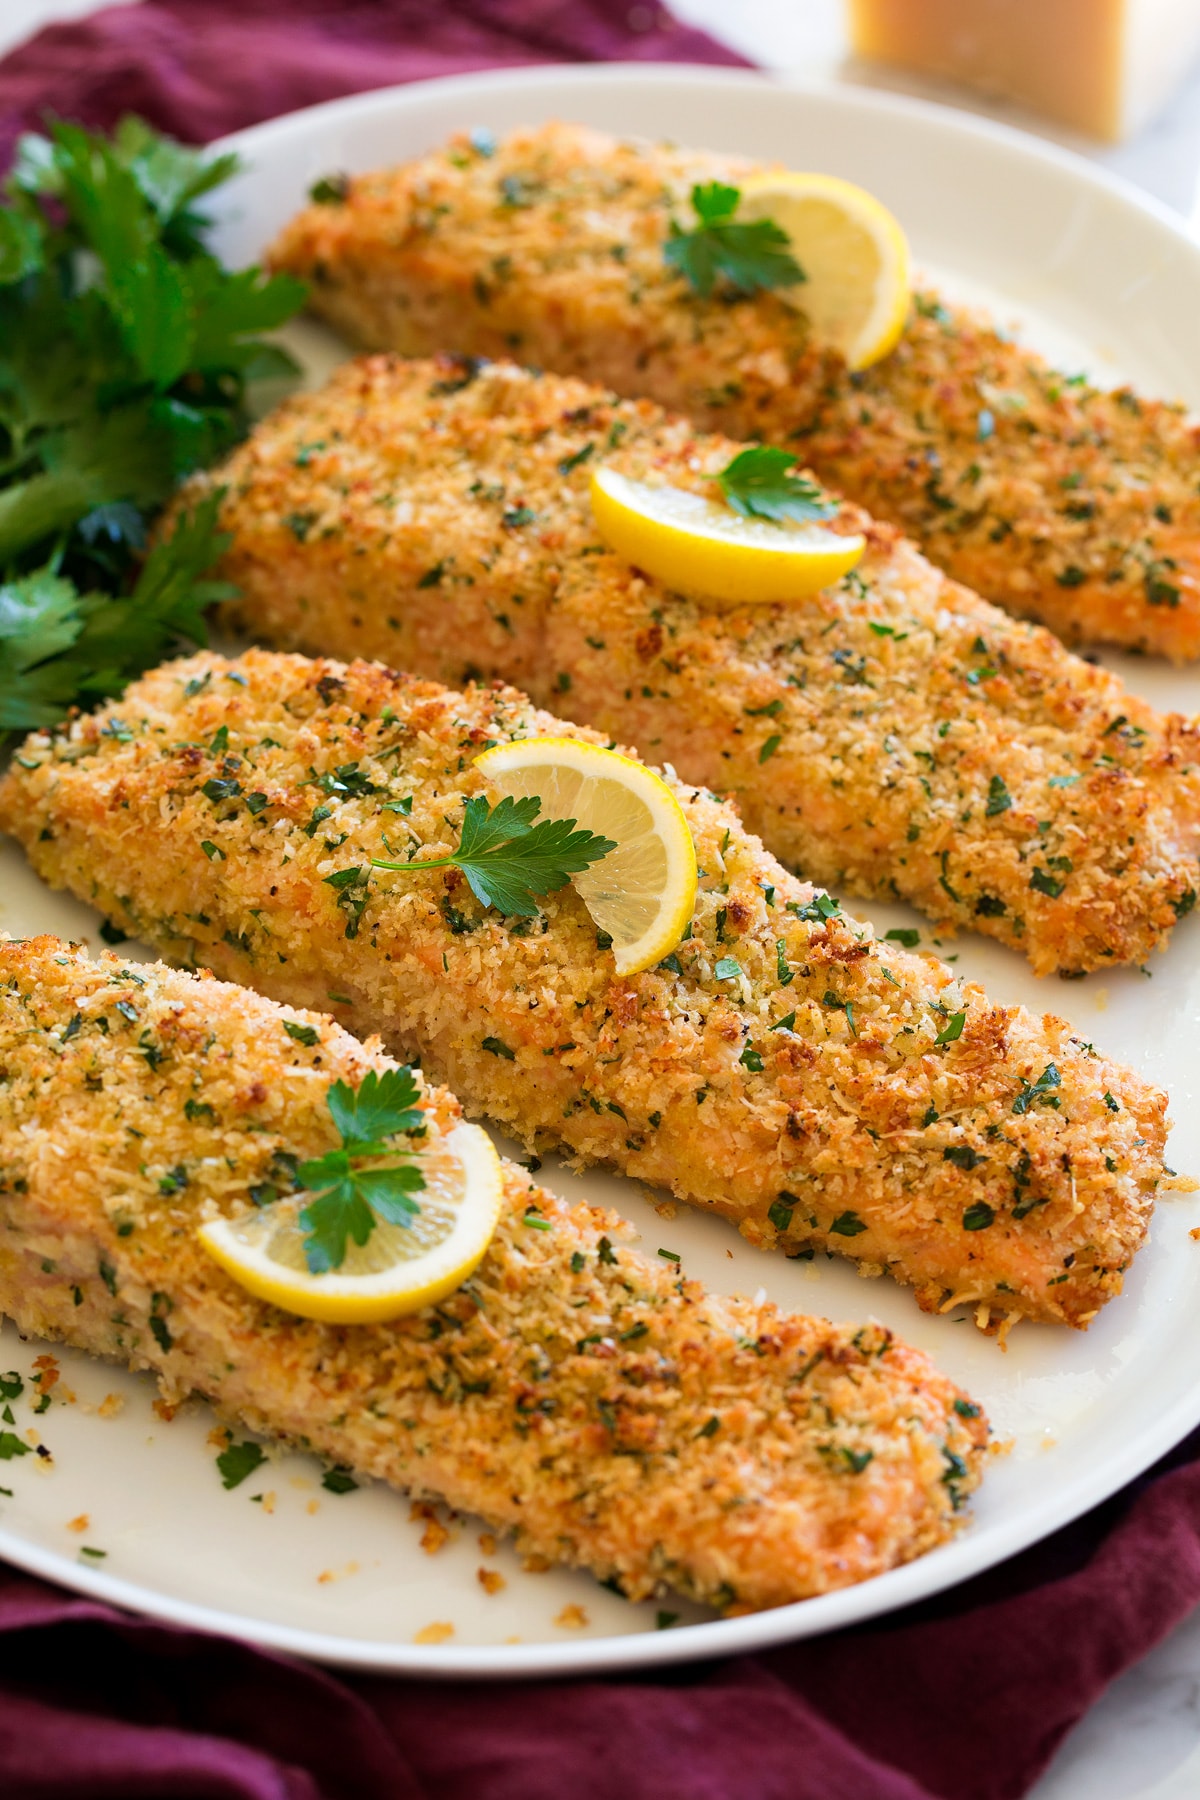 Four fillets of baked Parmesan Crusted Salmon shown on a white oval serving platter garnished with lemon slices and parsley.